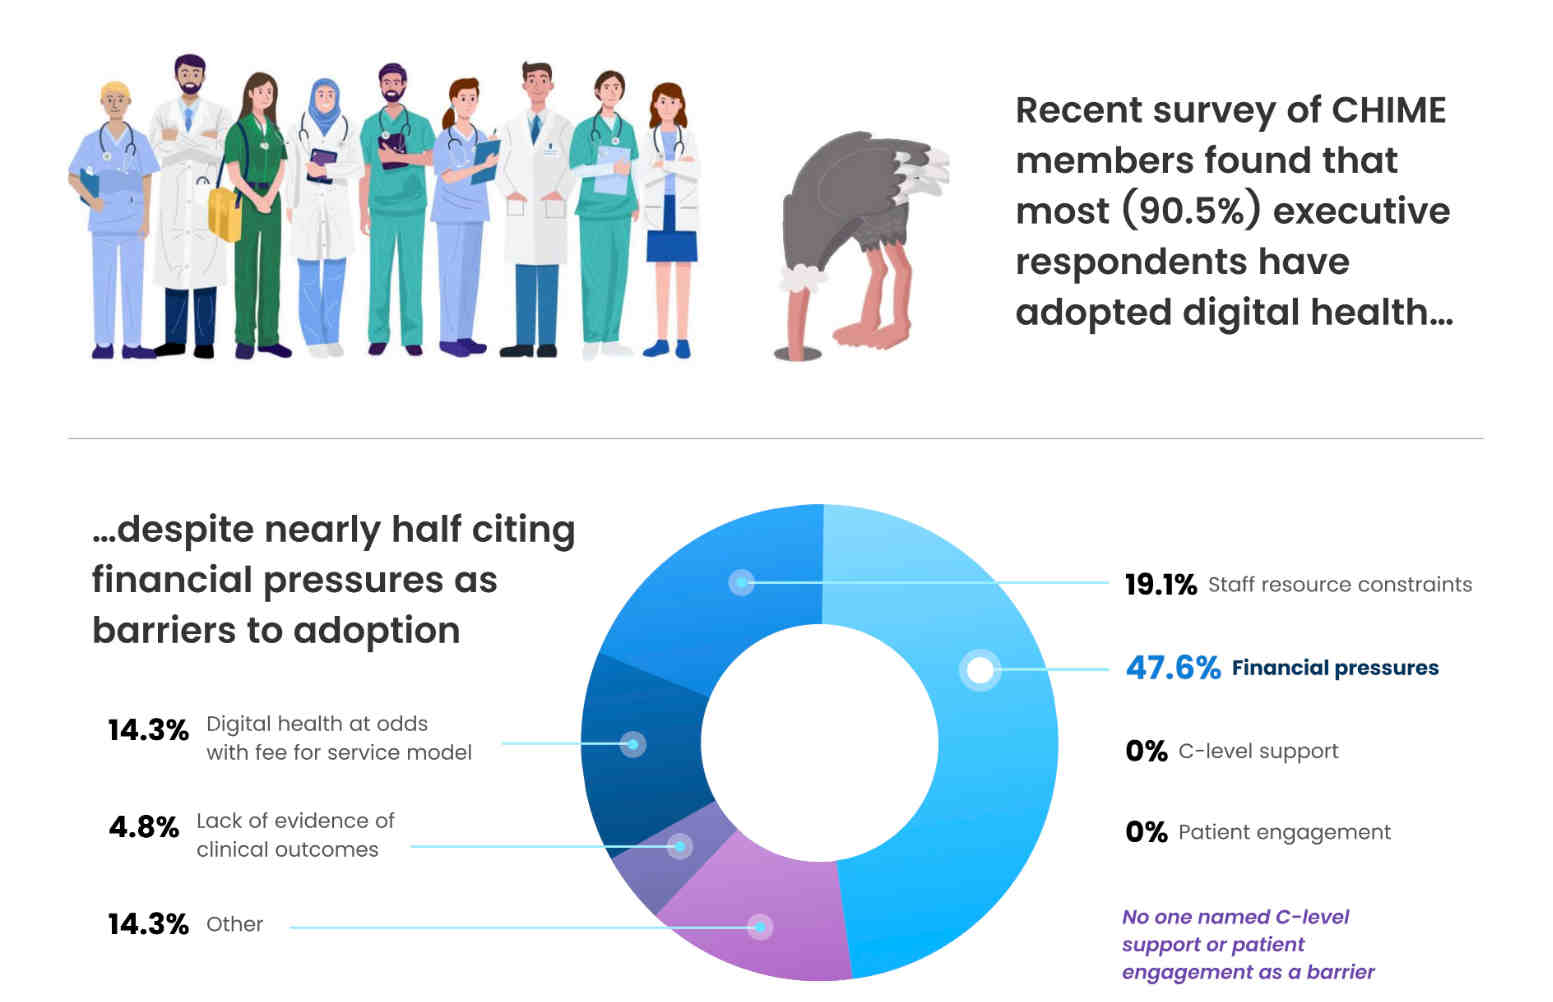 Financial Pressures Named Top Barrier to Digital Health Adoption, Xealth-CHIME Survey Finds